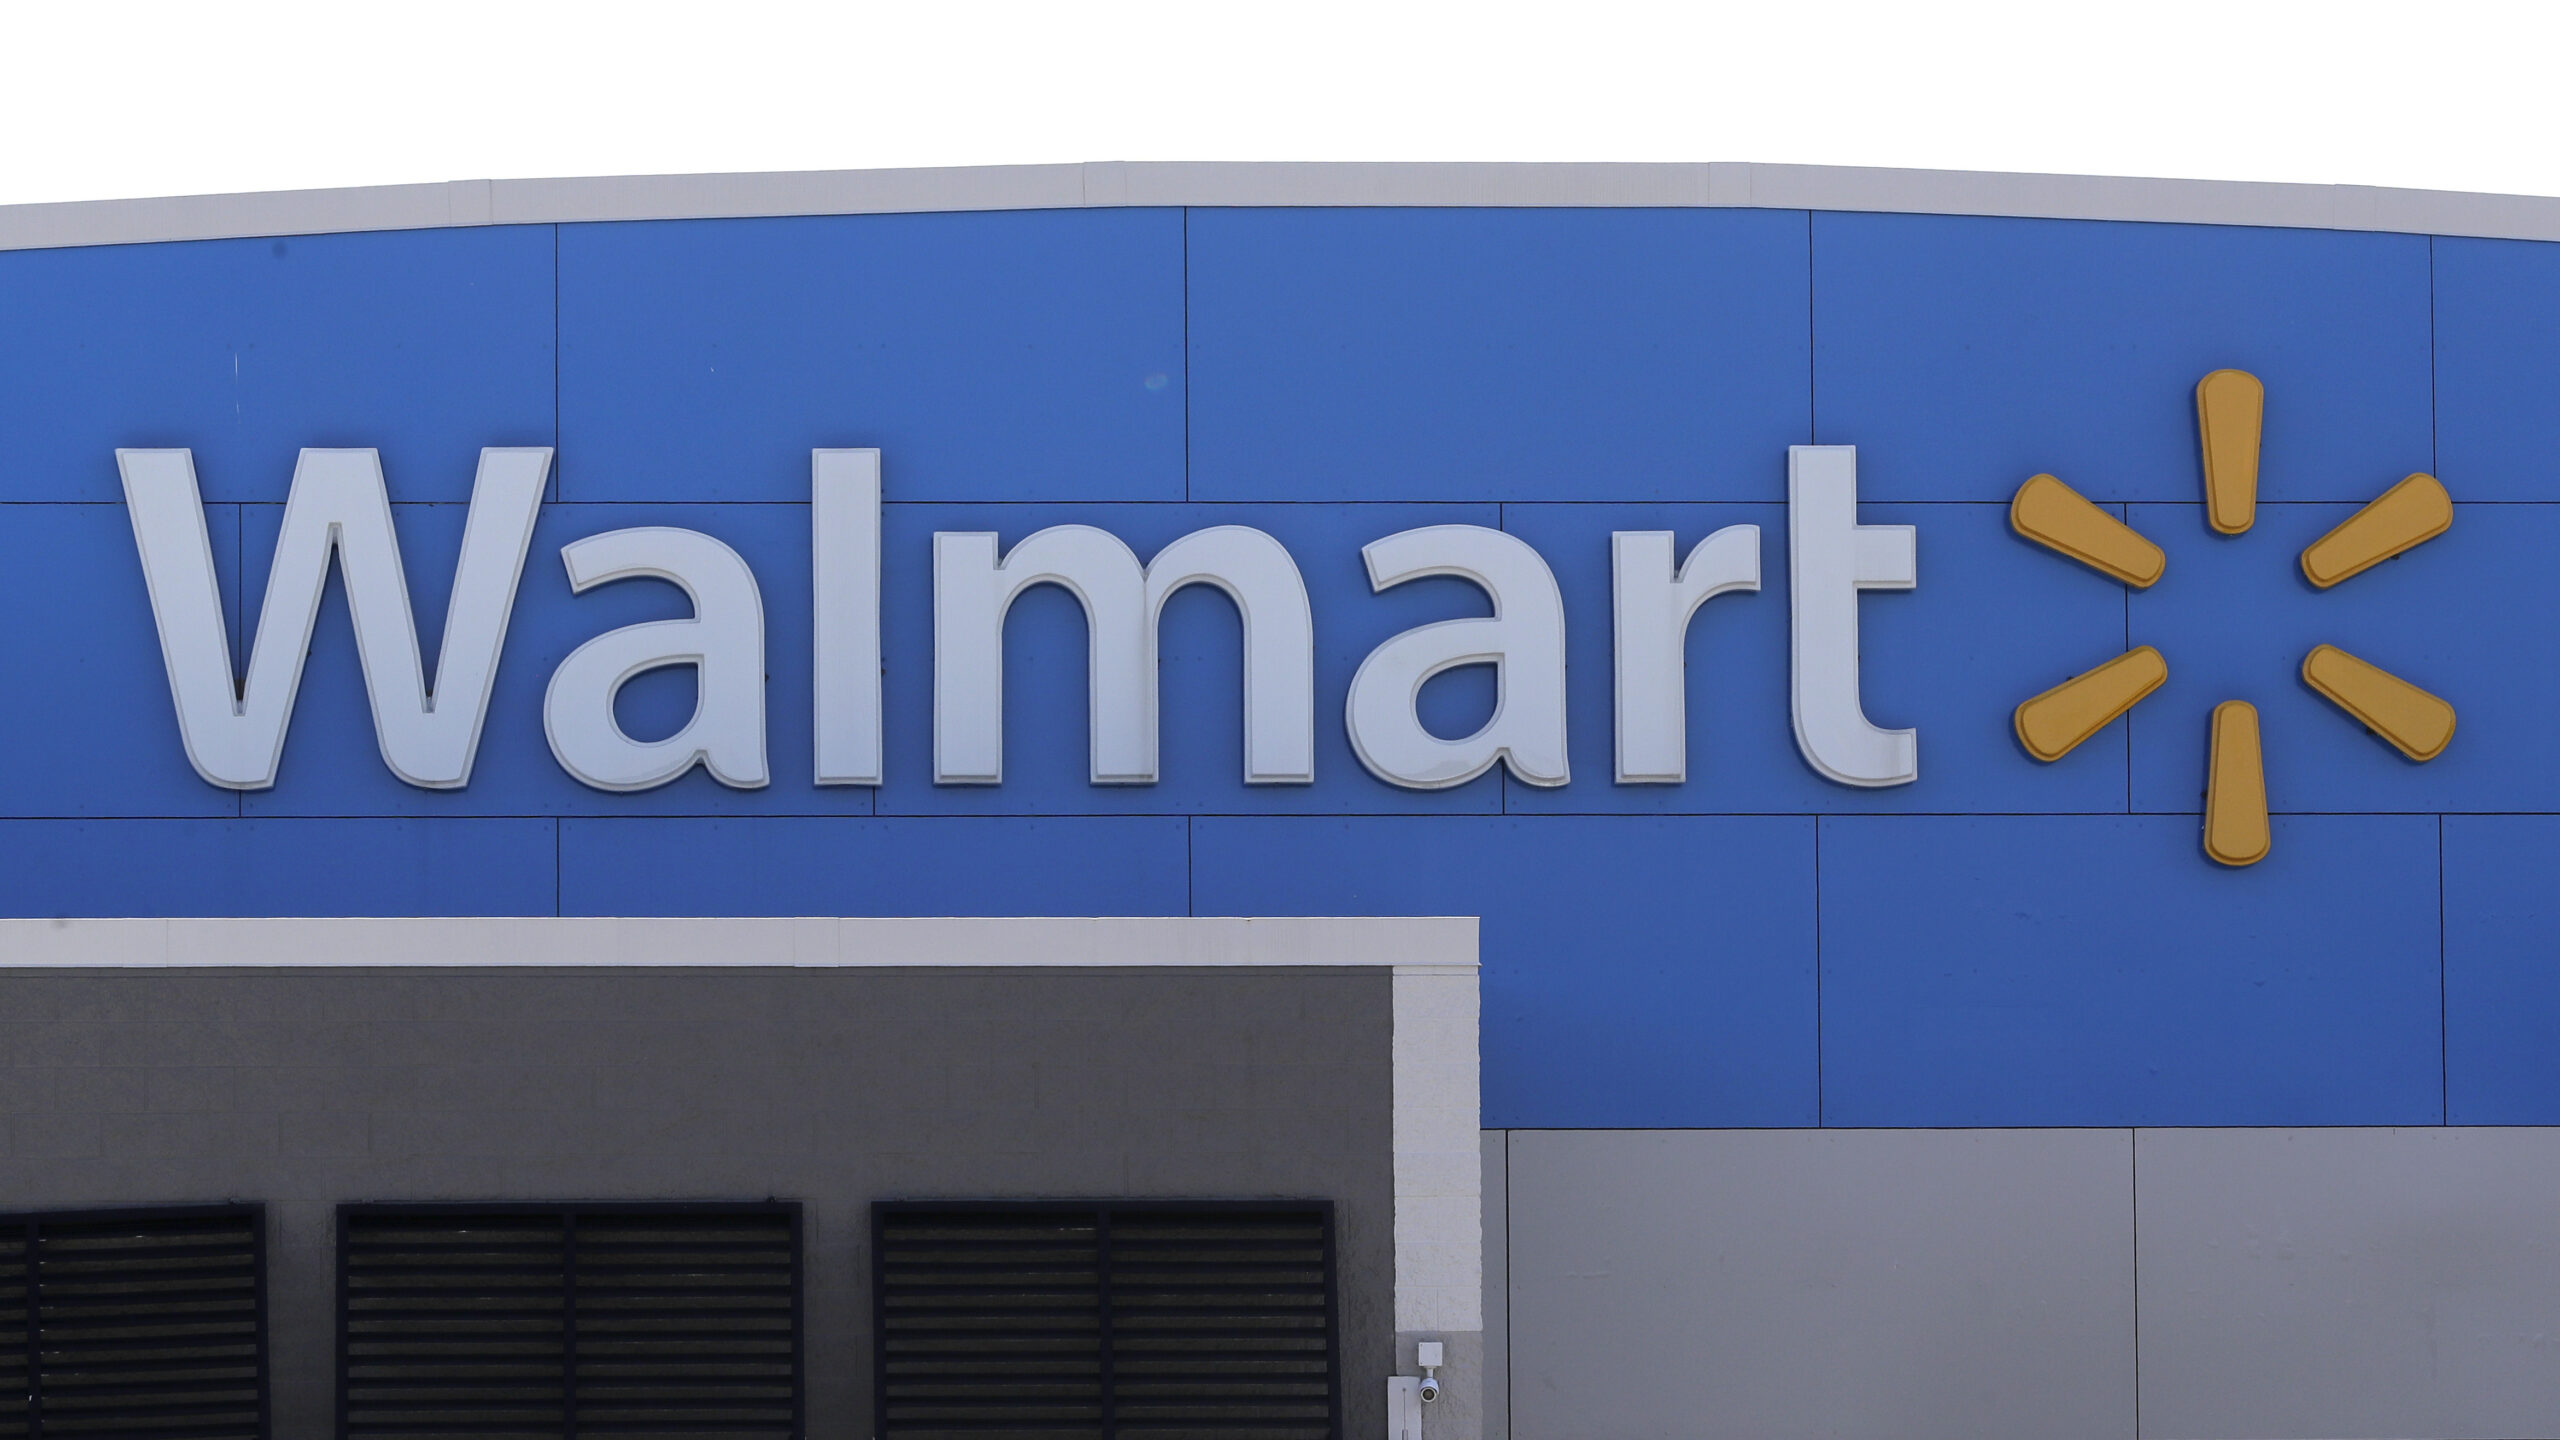 FILE - In this Tuesday, Sept. 3, 2019, file photo, A Walmart logo is attached to the outside of a Walmart store in Walpole, Mass. Walmart says it has removed ammunition and firearms from displays at U.S. stores, citing “civil unrest” in some areas. The nation’s largest retailer, based in Bentonville, Arkansas, sell firearms in about half of its 4,700 stores. (AP Photo/Steven Senne, File)